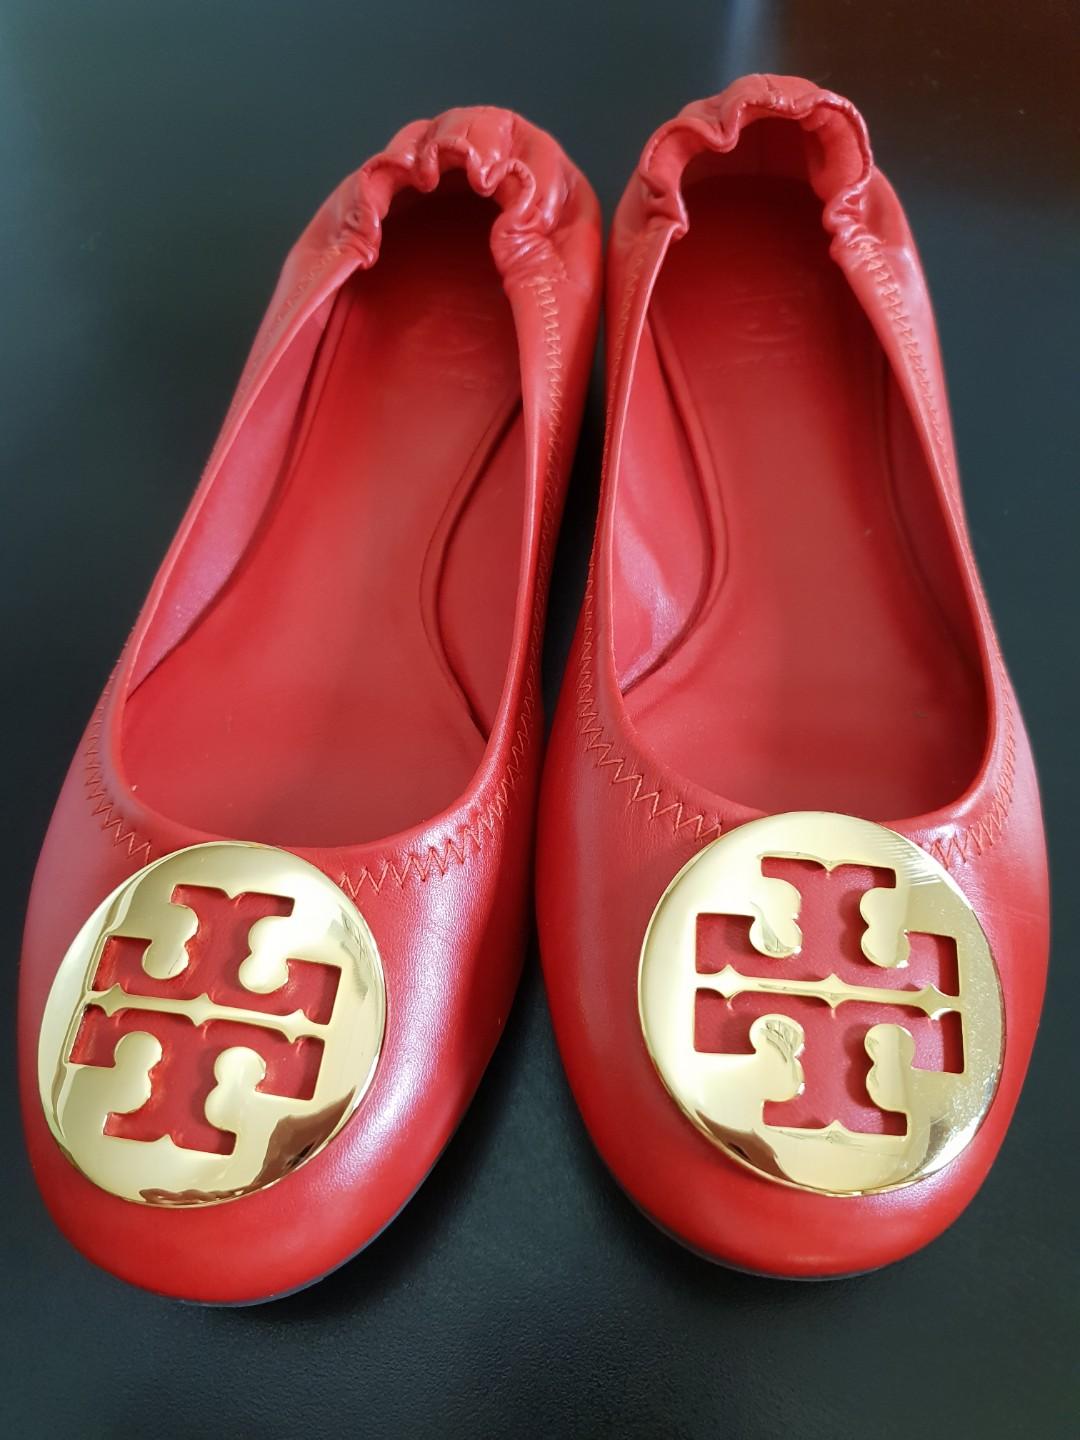 Tory Burch Reva Flats Bnew in Box in Orchid Color with Massai Red Gold Logo  Size US , Women's Fashion, Footwear, Flats & Sandals on Carousell